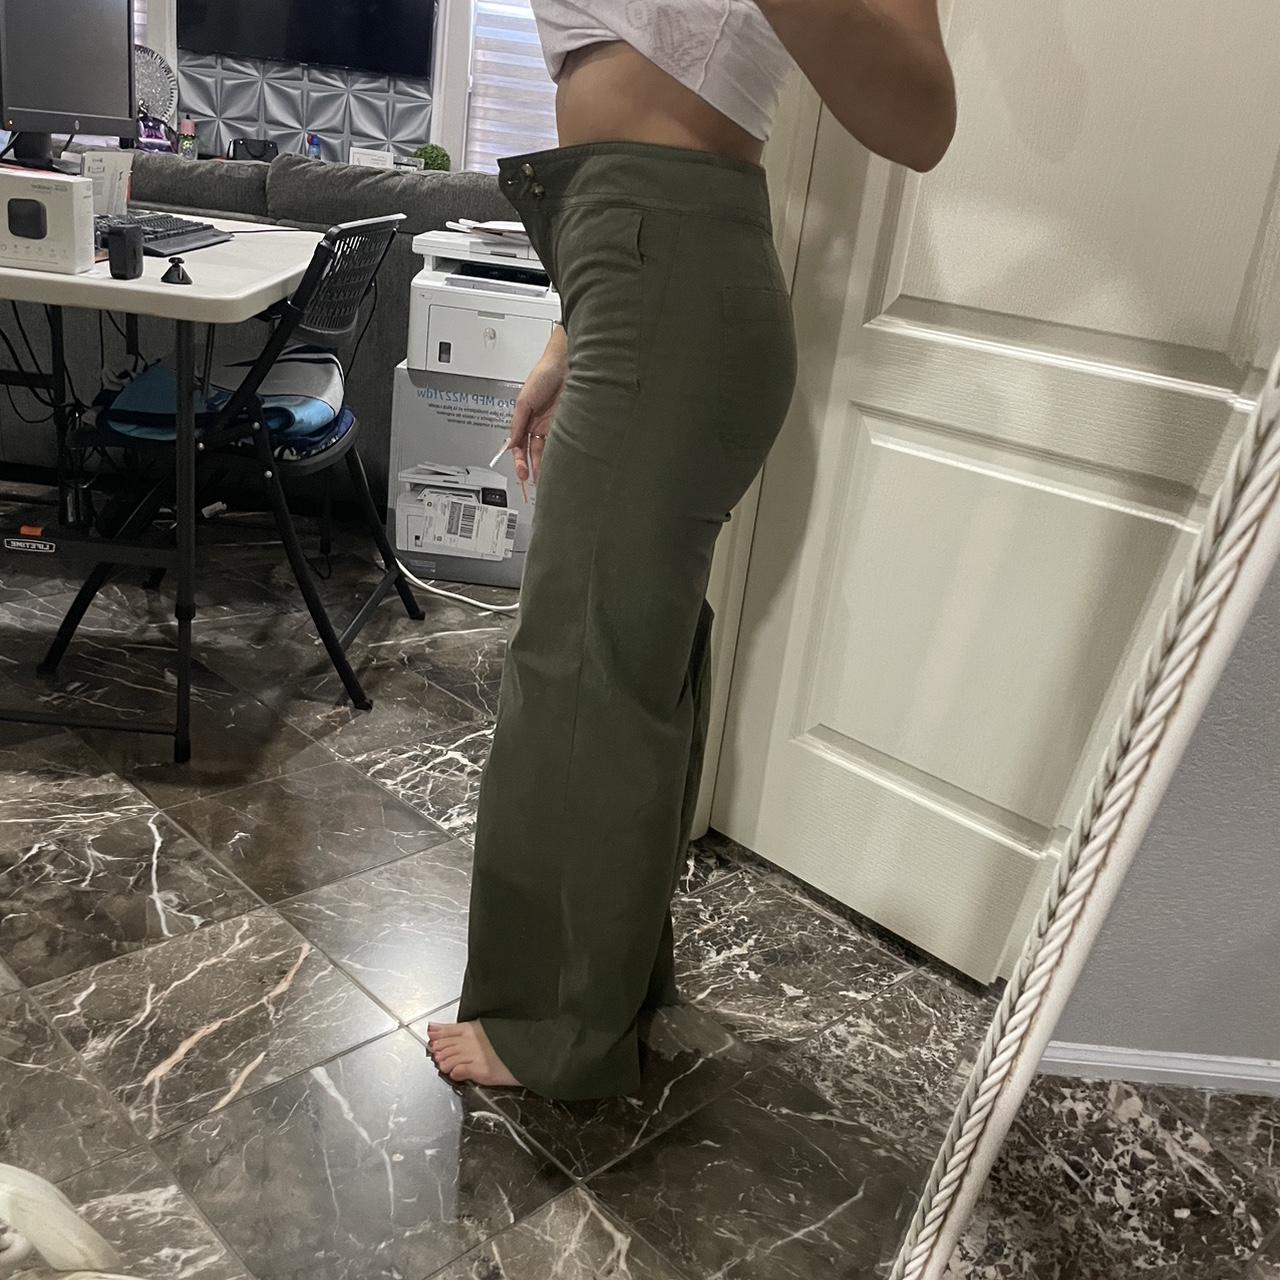 J.Crew Olive Green Elasticated Pants, Women's Fashion, Bottoms, Other  Bottoms on Carousell